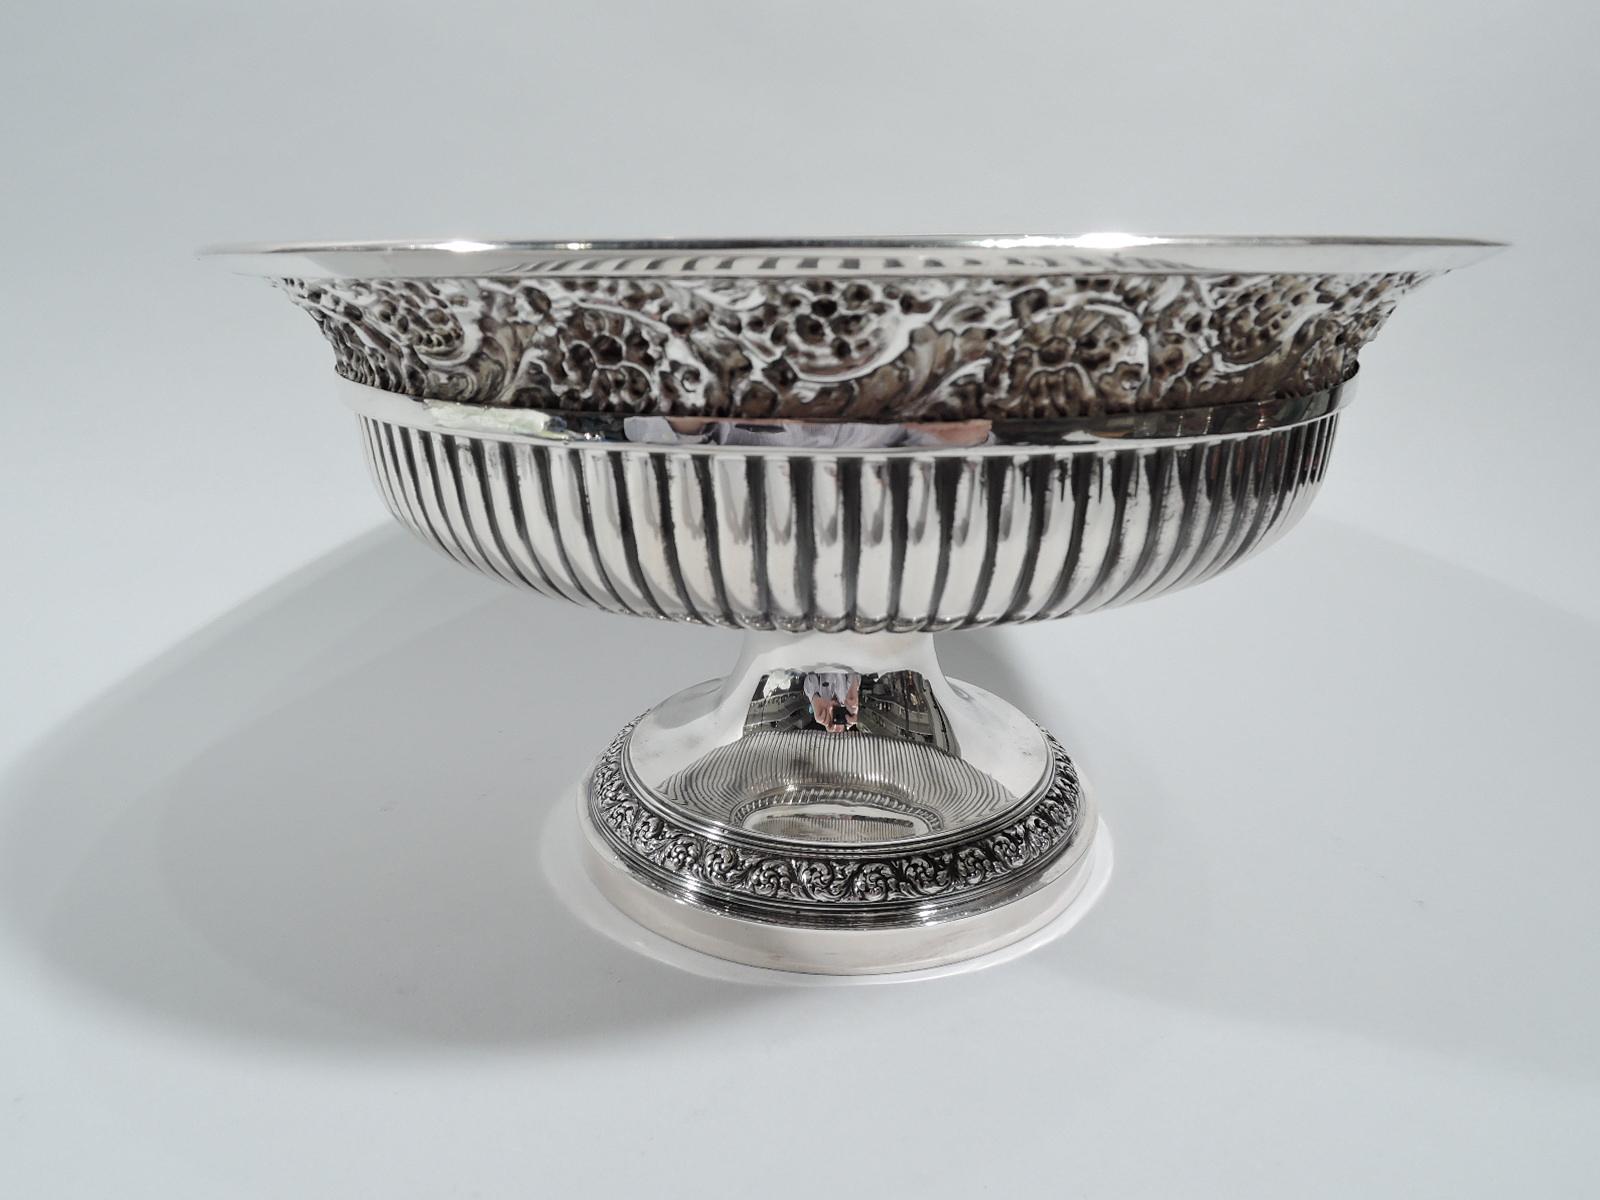 Stylish sterling silver centerpiece compote. Made by Tiffany & Co. in New York, ca 1882. Round bowl; well flat with central circular frame (vacant) radiating flutes. Rim interior and foot have repousse rinceaux borders. Fully marked including